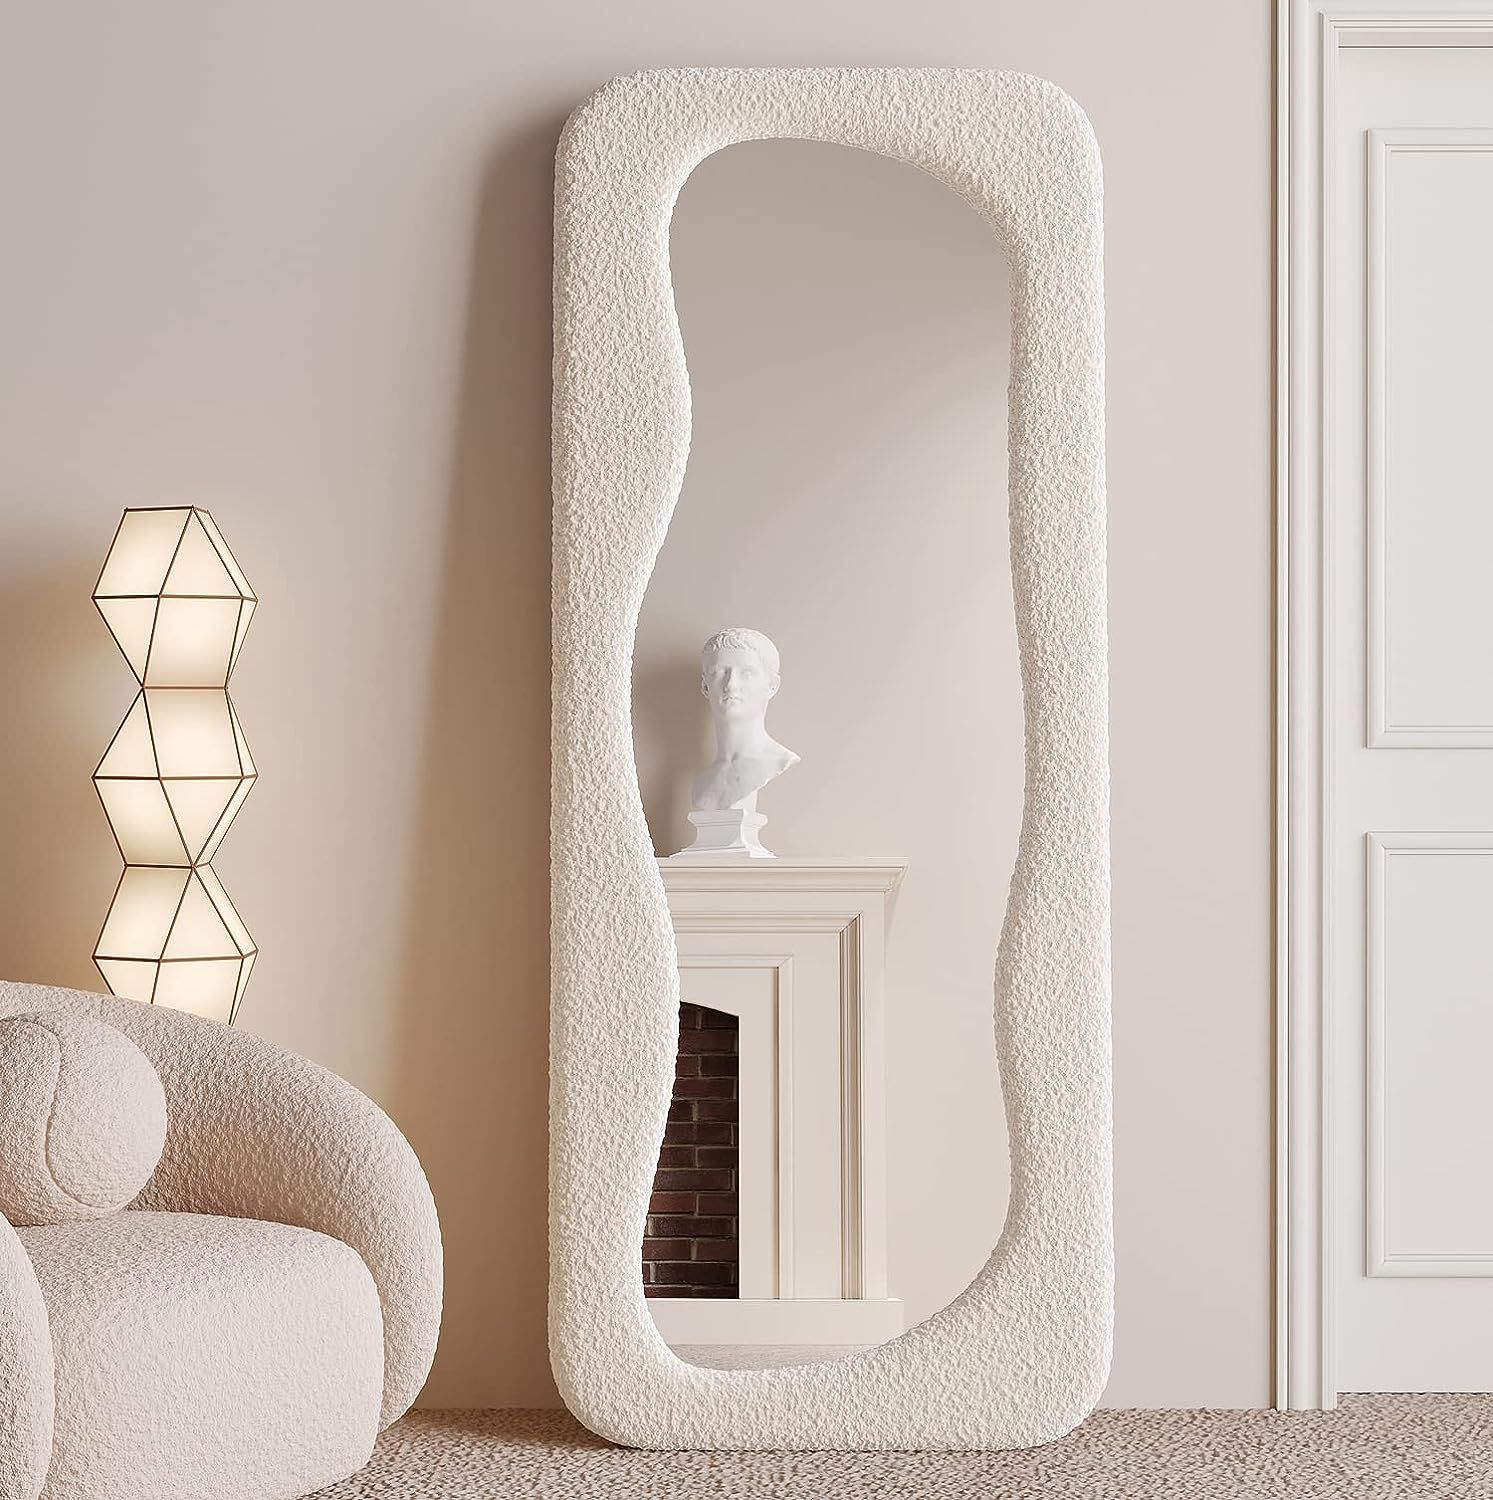 Sophisticated Wooden Mirror Designs for Classic Décor